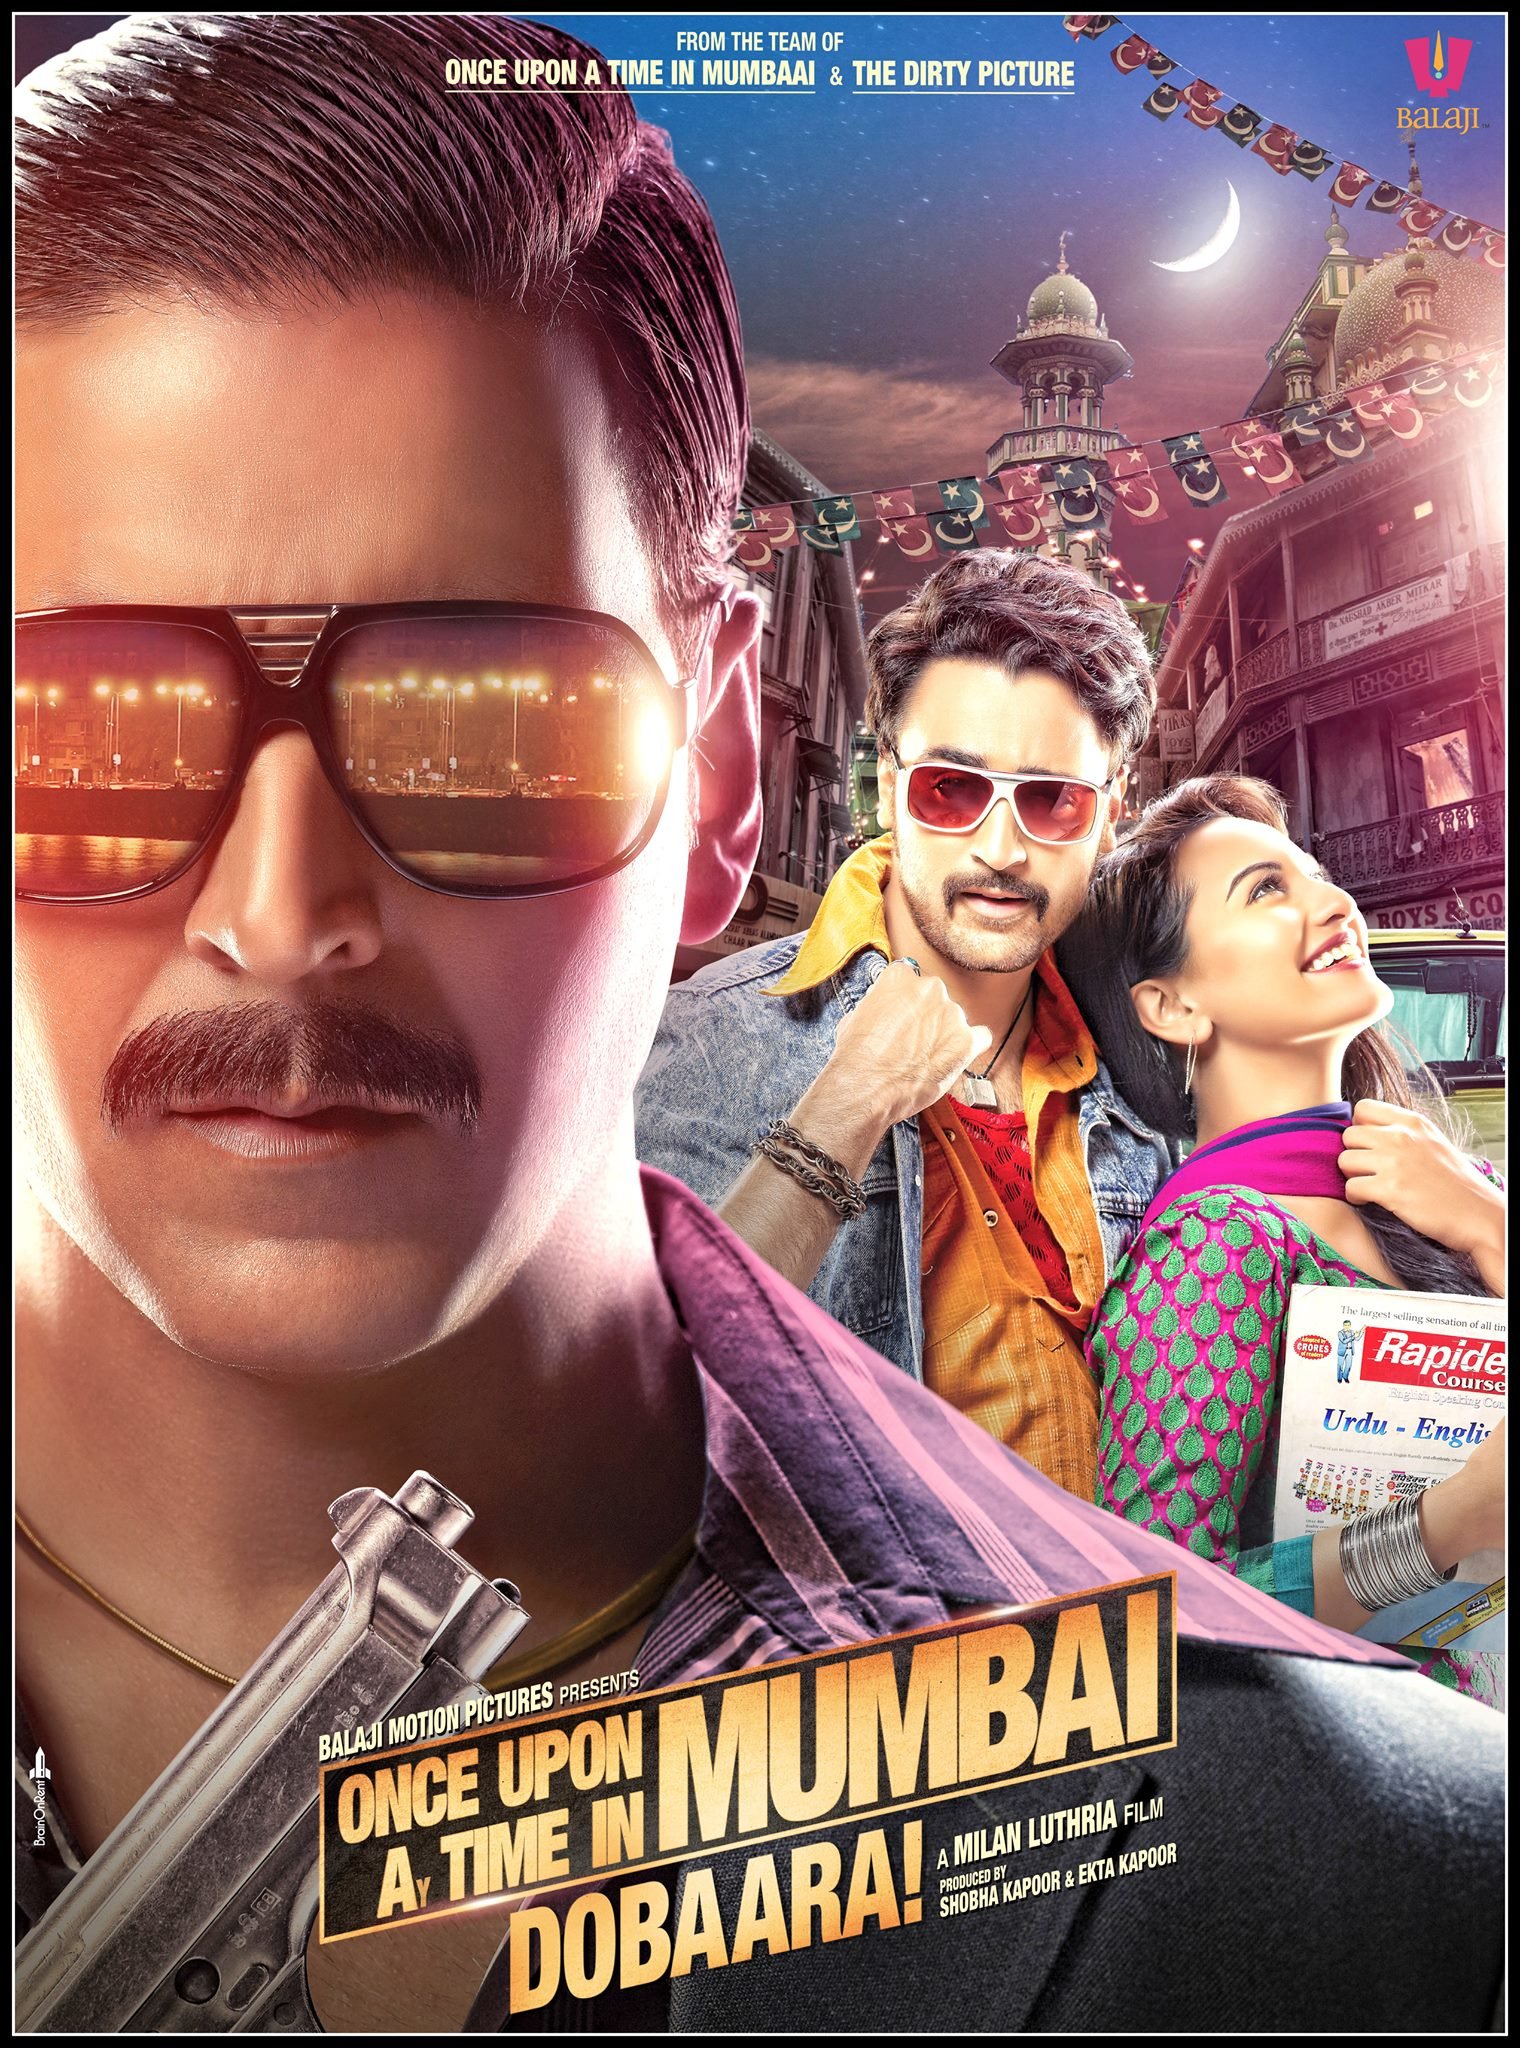 once-upon-a-time-in-mumbai-dobaara-movie-purchase-or-watch-online